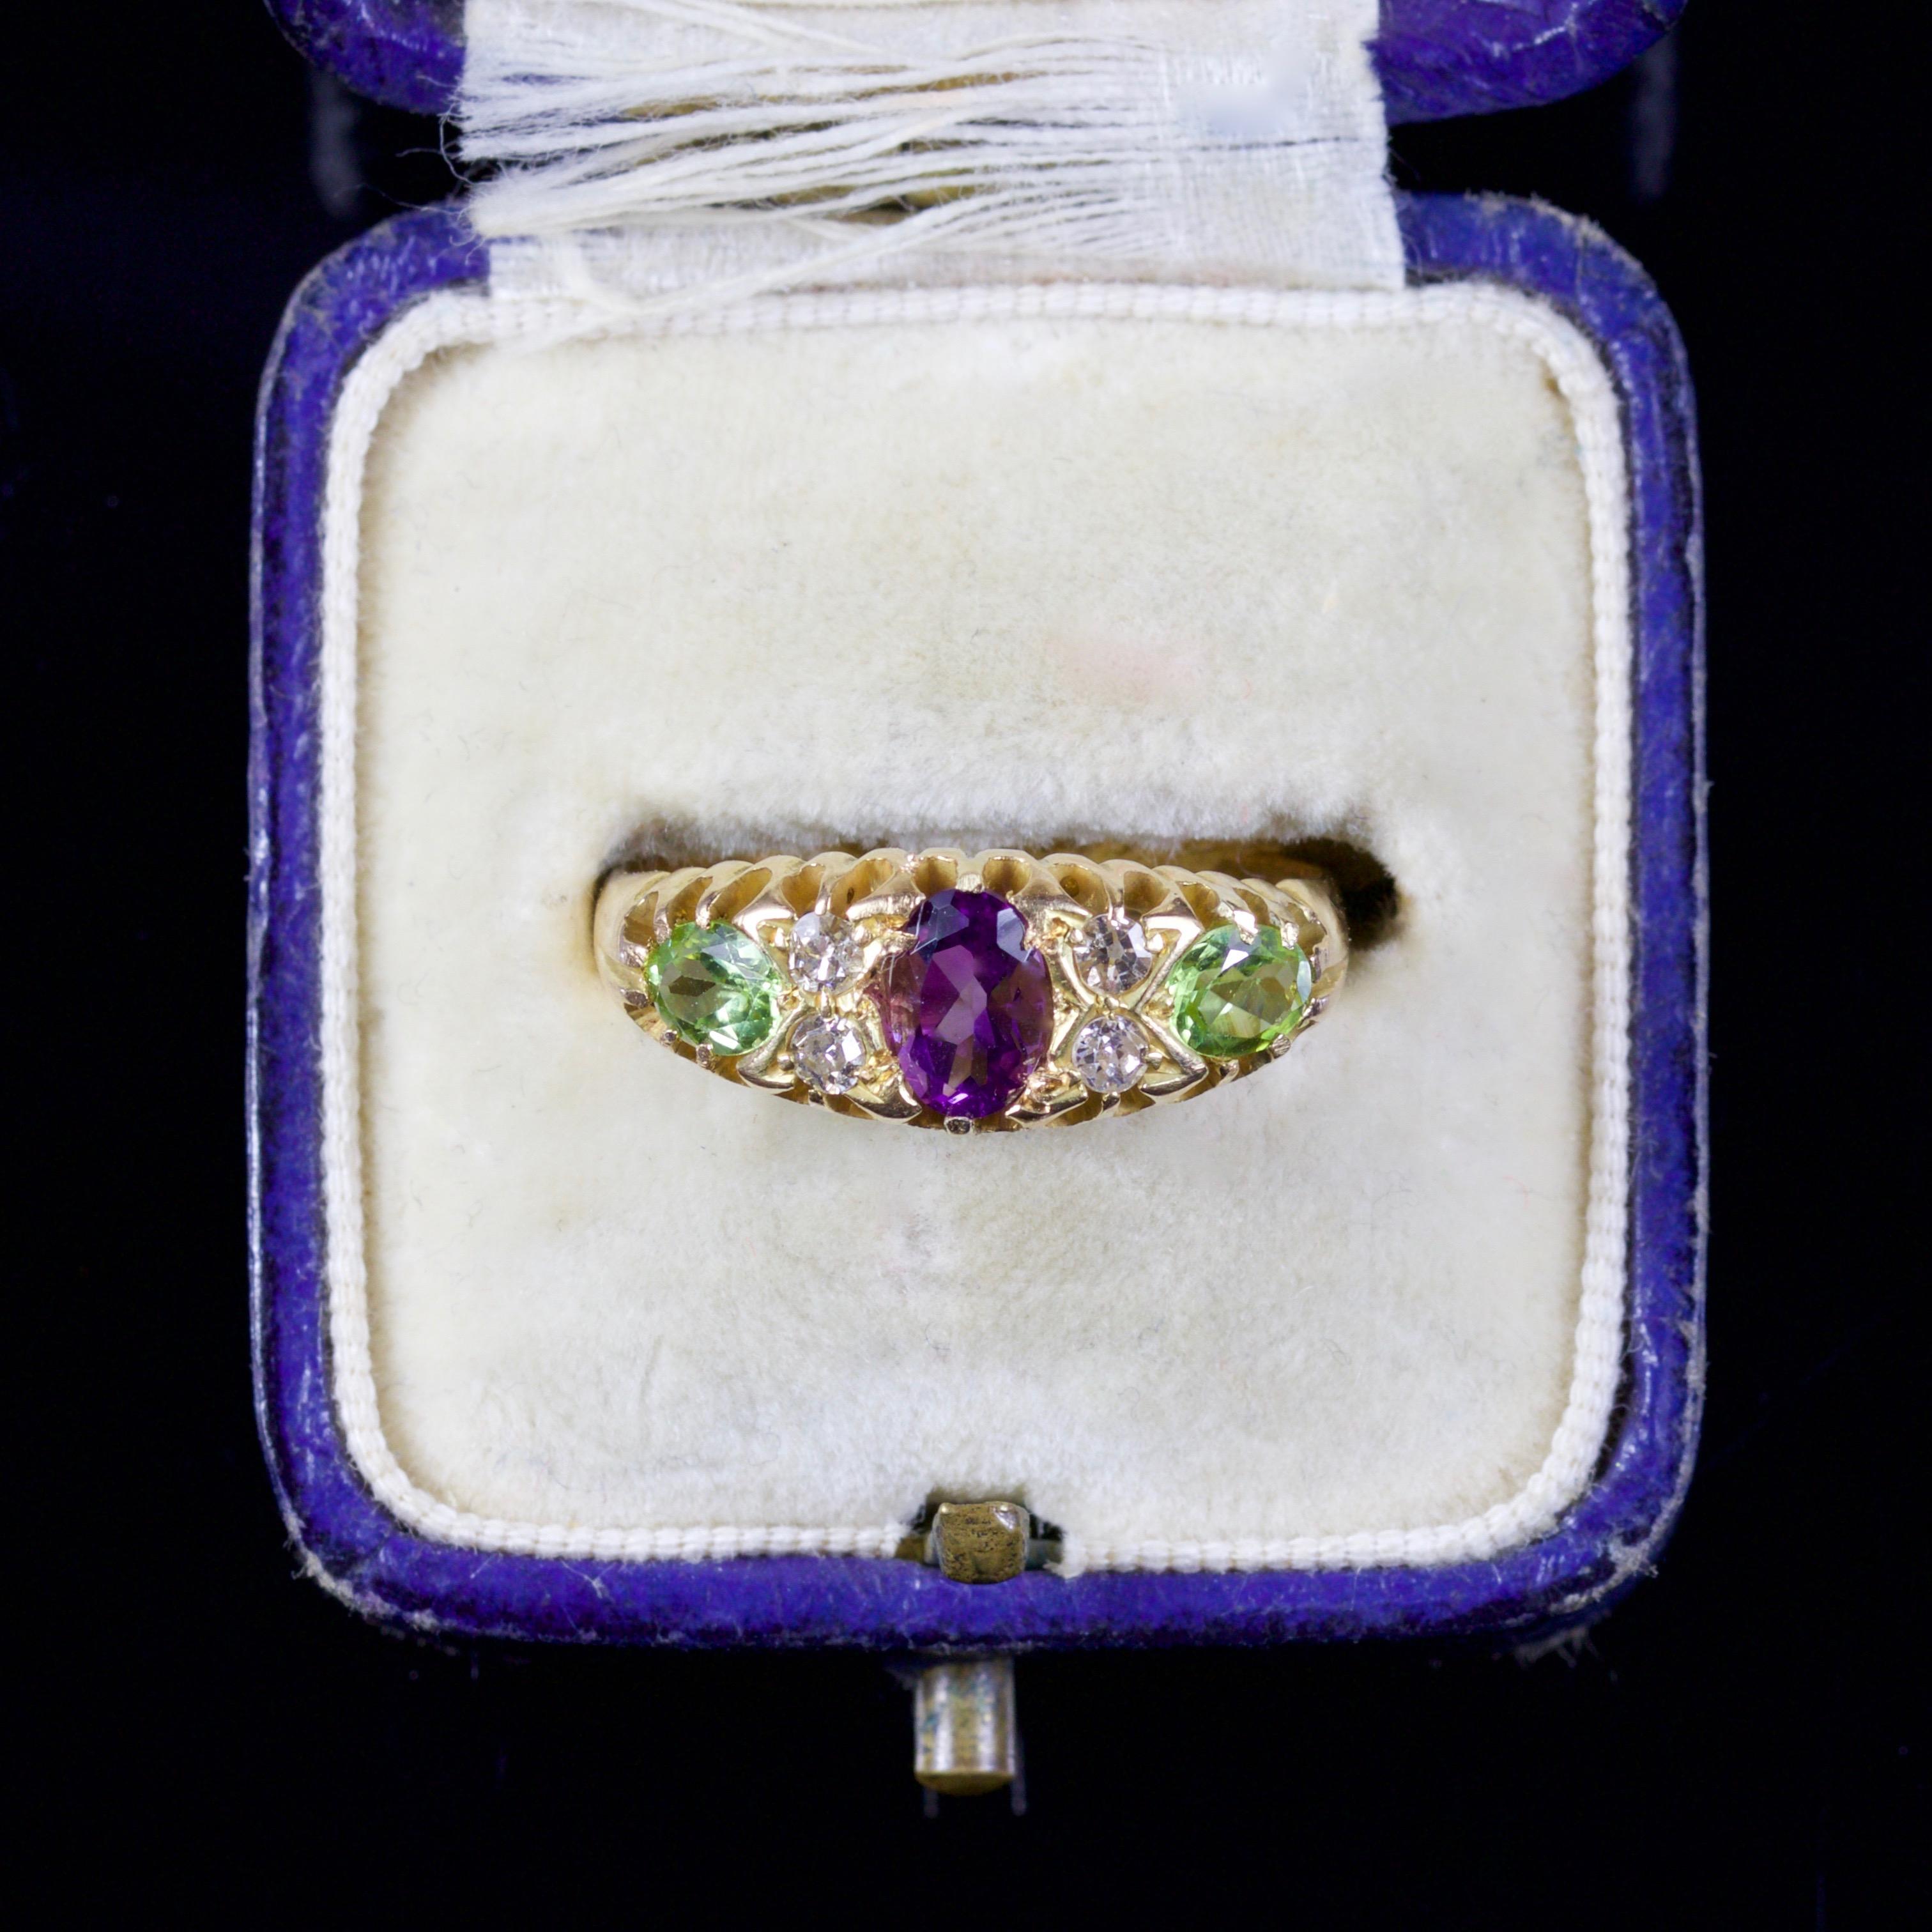 Antique Victorian Suffragette Ring Dated 18 Carat Chester, 1915 3